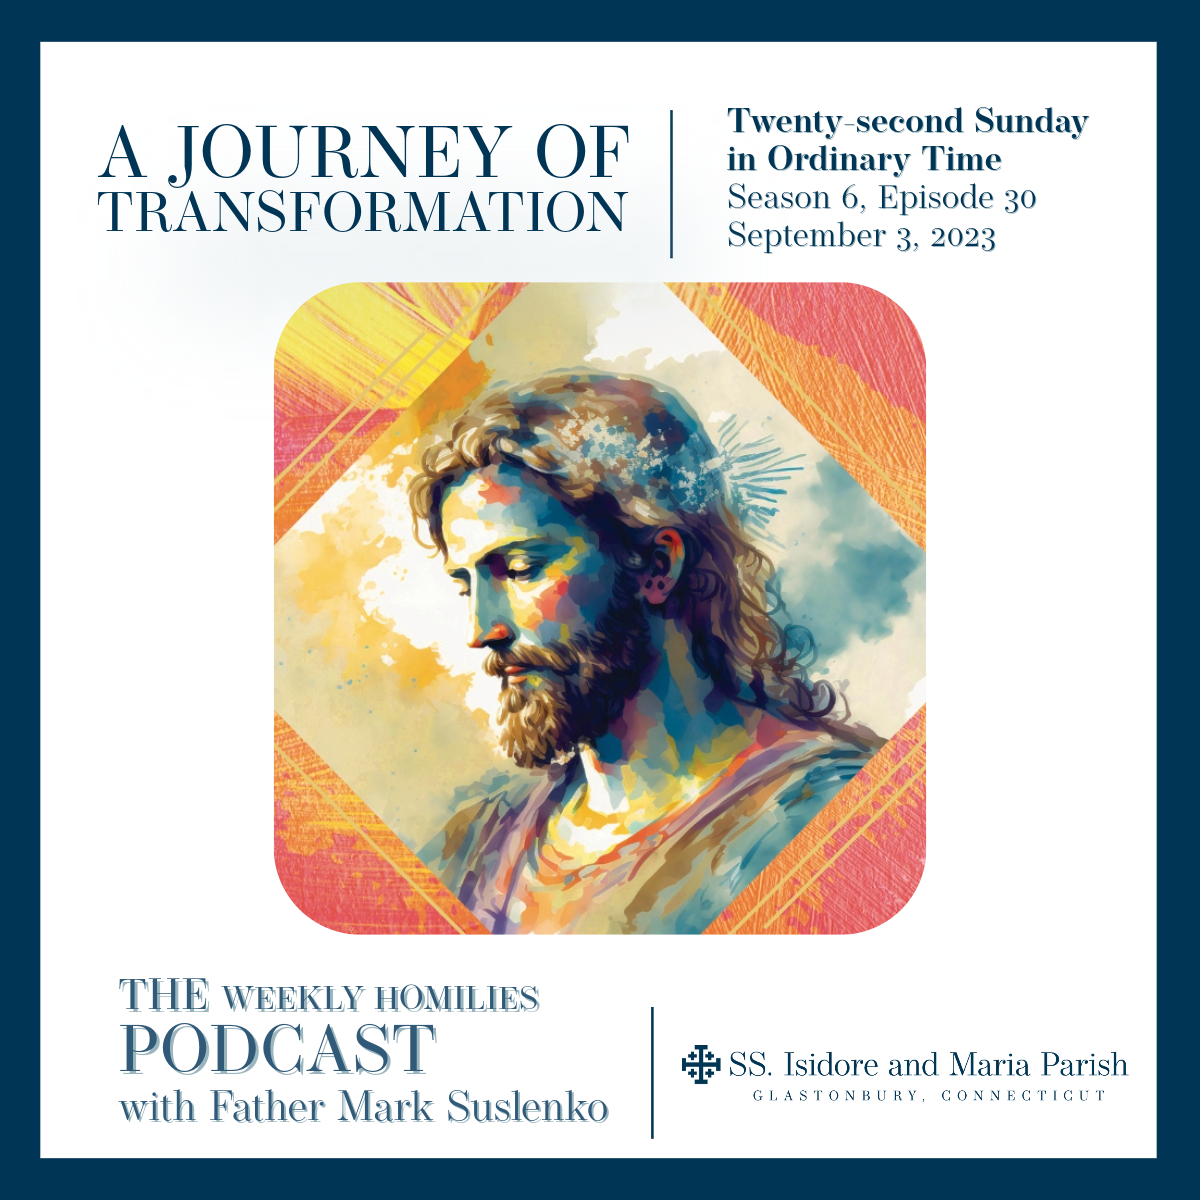 PODCAST: A Journey of Transformation